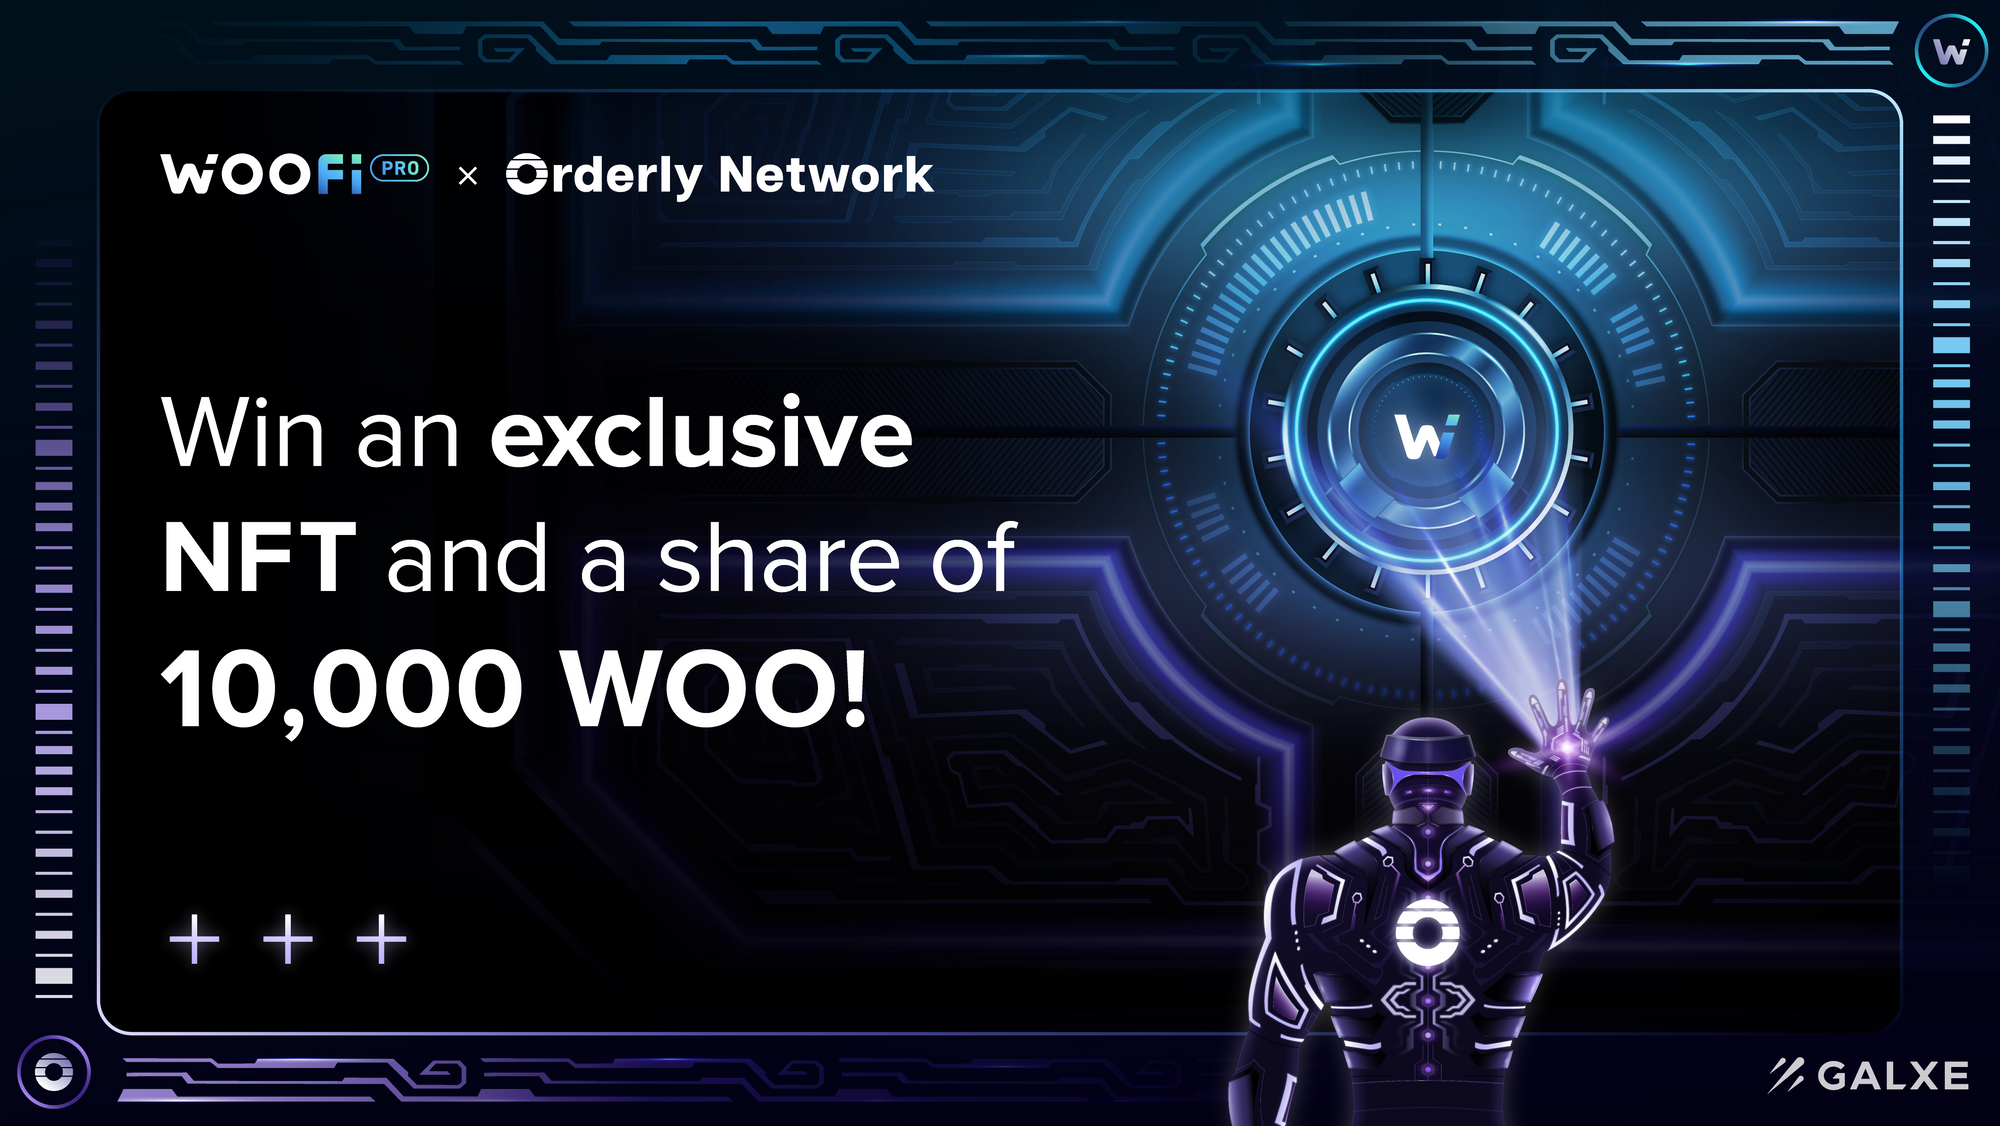 Unveiling the first-ever WOOFi x Orderly NFT